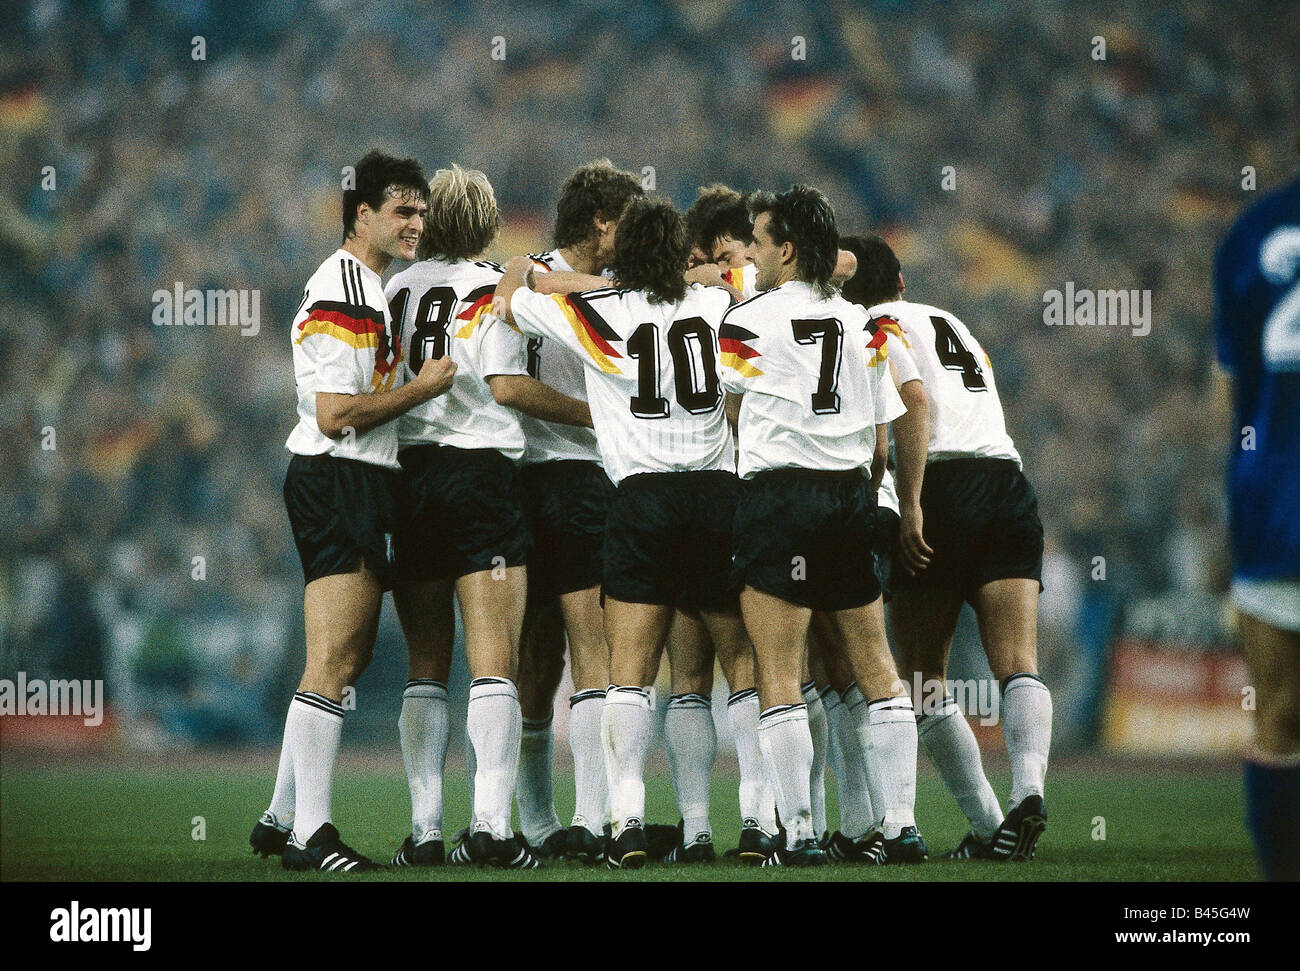 Sport / Sports, soccer, football, European championship, EURO 1988, Germany against Italy (1:1) in Düsseldorf, 10.6.1988, jubilation after free kick to 1:1 by Andreas Brehme, Thomas Berthold, Pierre Littbarski, match, historic, historical, 20th century, people, 1980s, Stock Photo